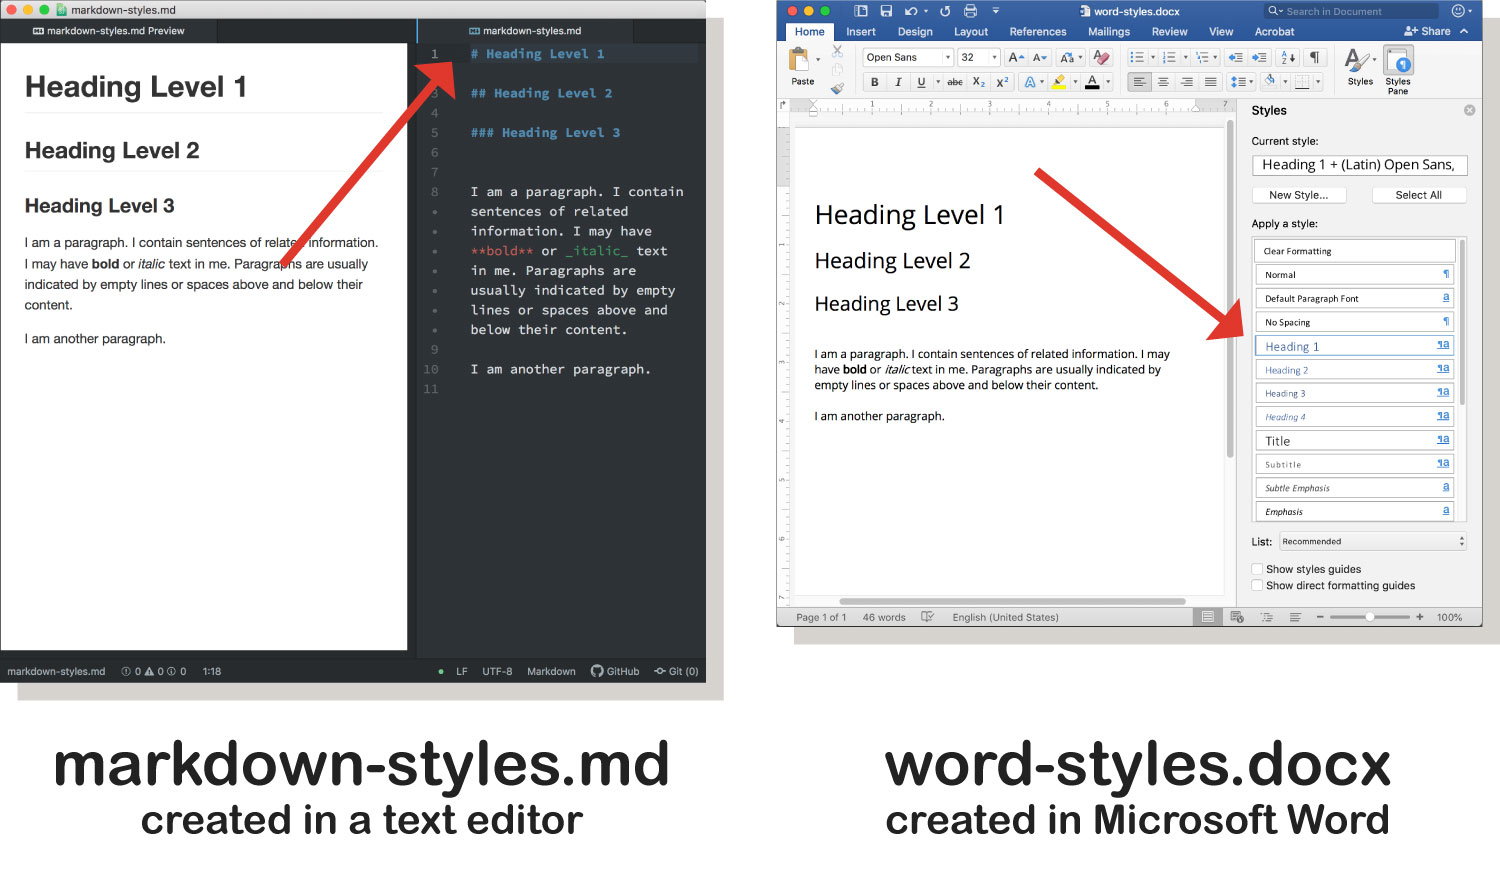 Comparing Markdown and word heading styles